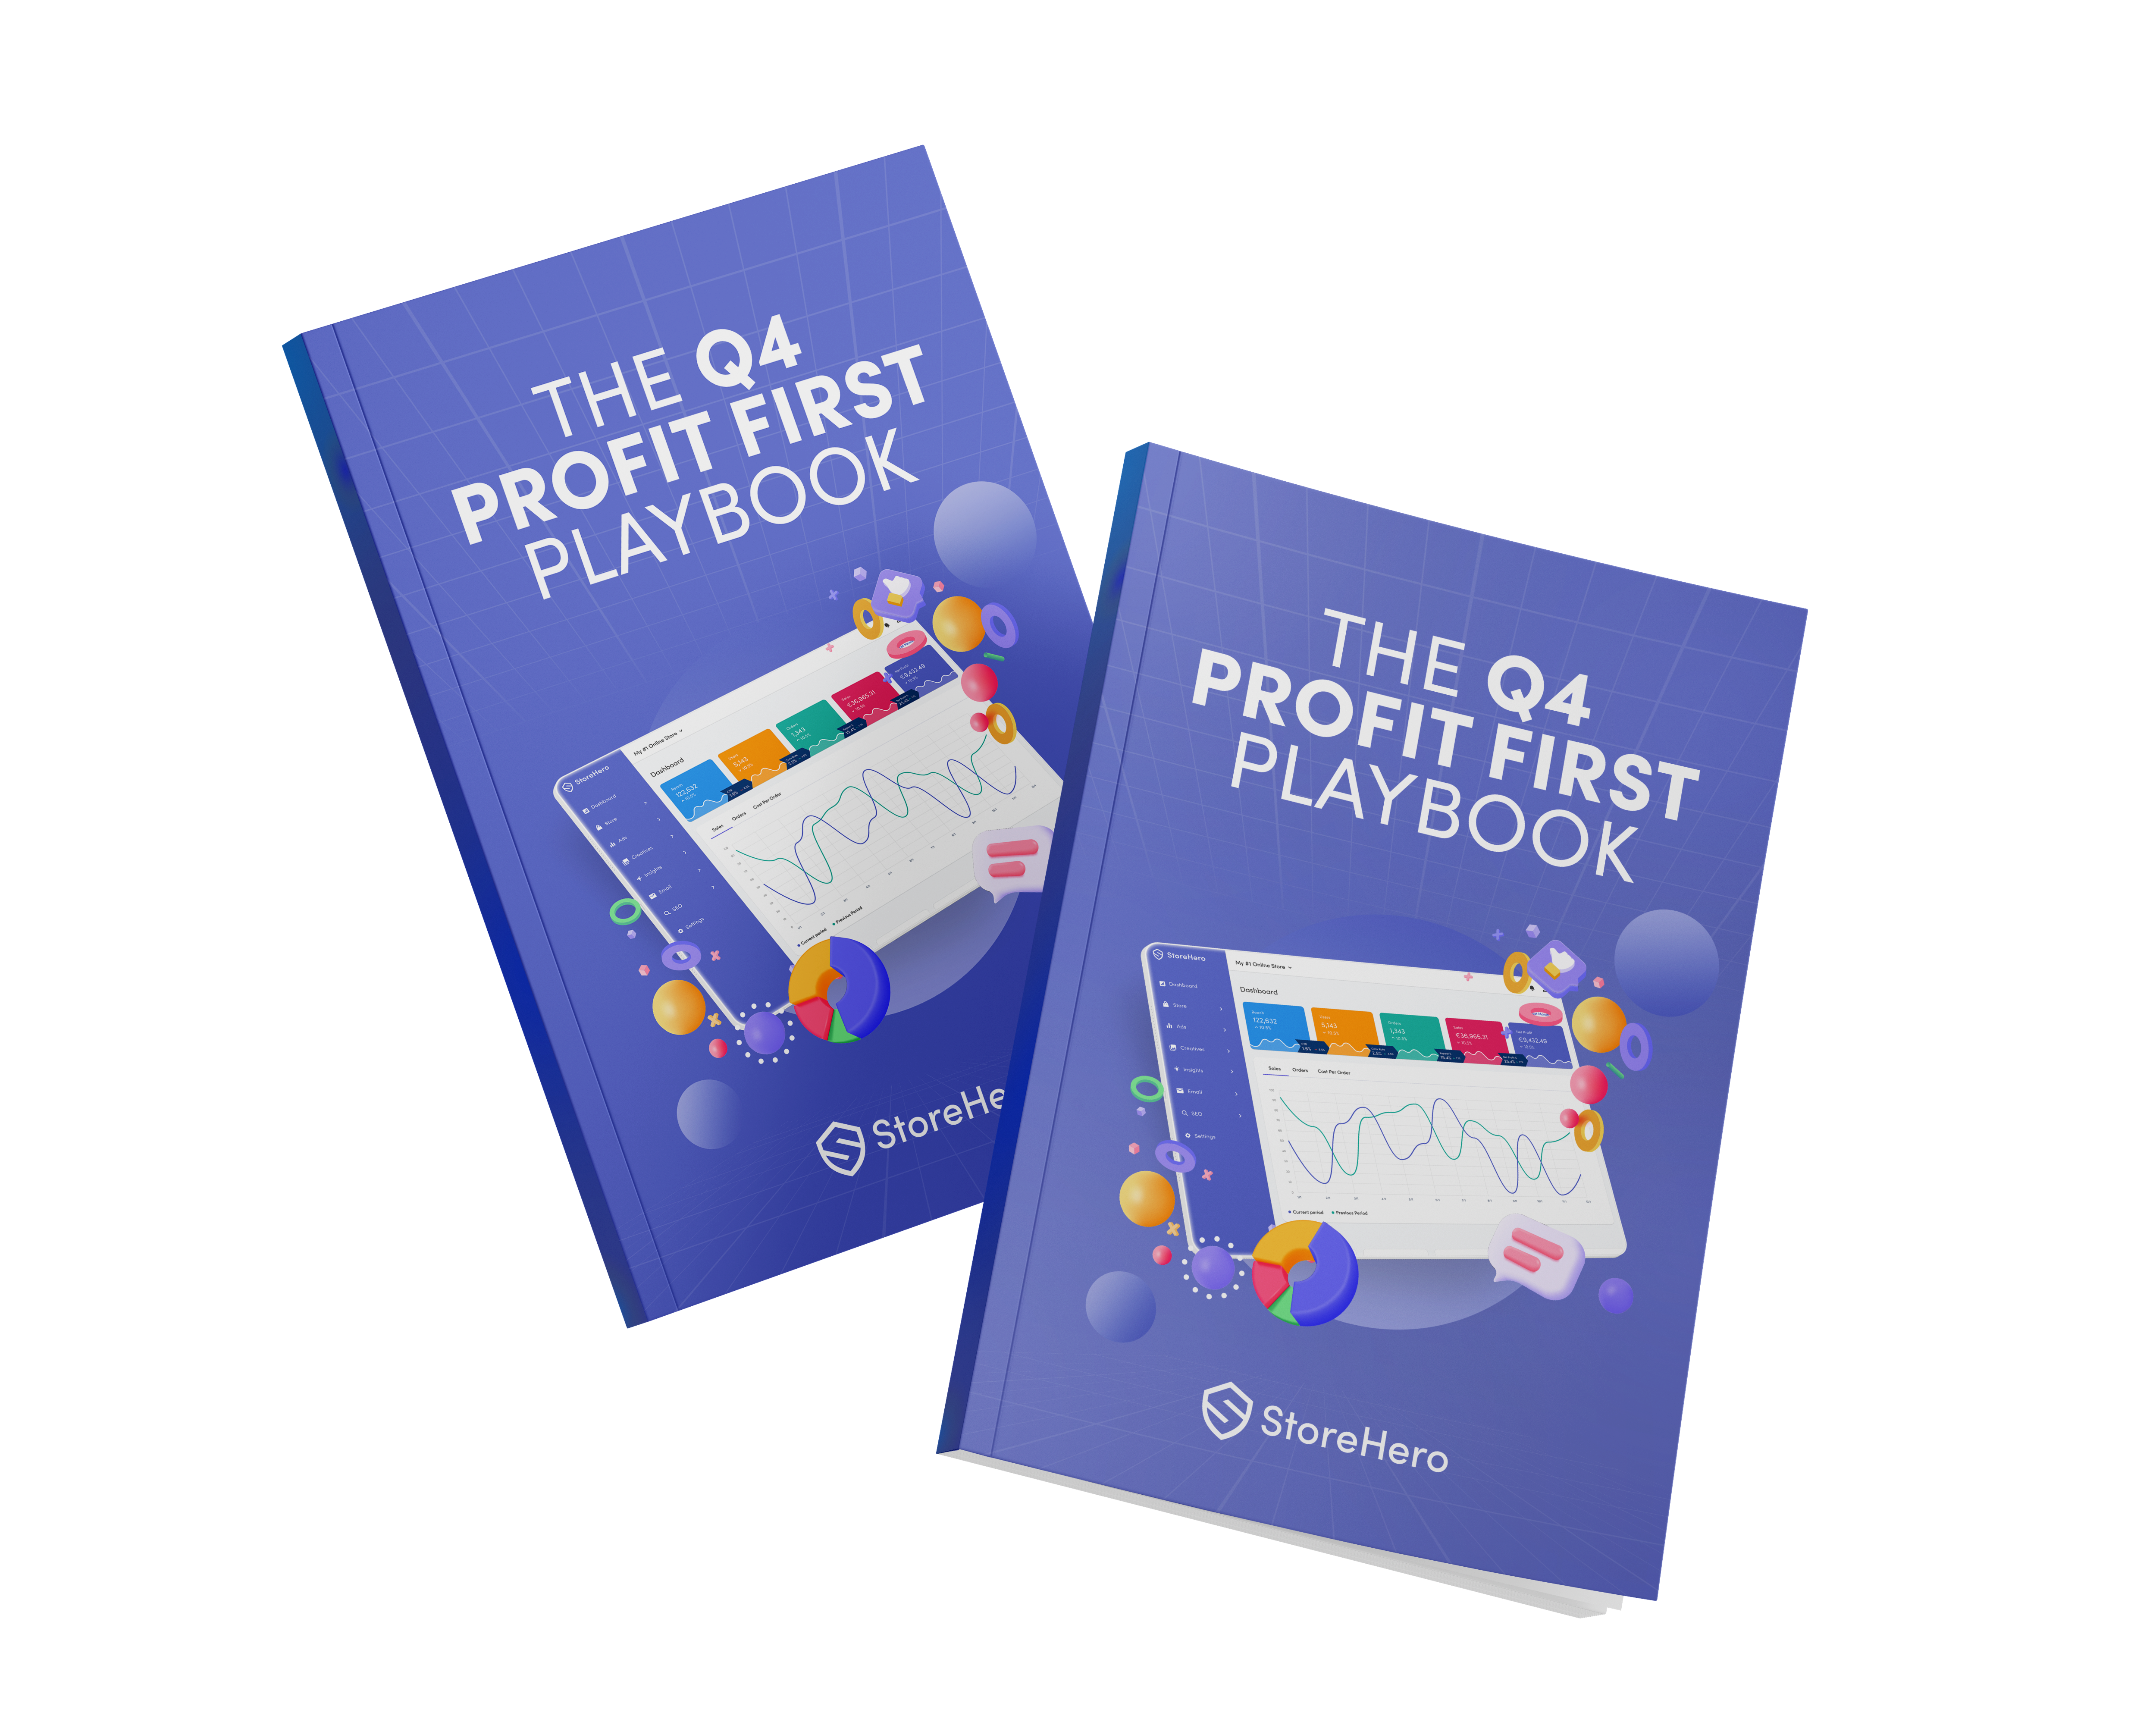 Cover of 'The Q4 Profit First Playbook' by StoreHero, featuring a dashboard with charts and metrics highlighting profit strategies.